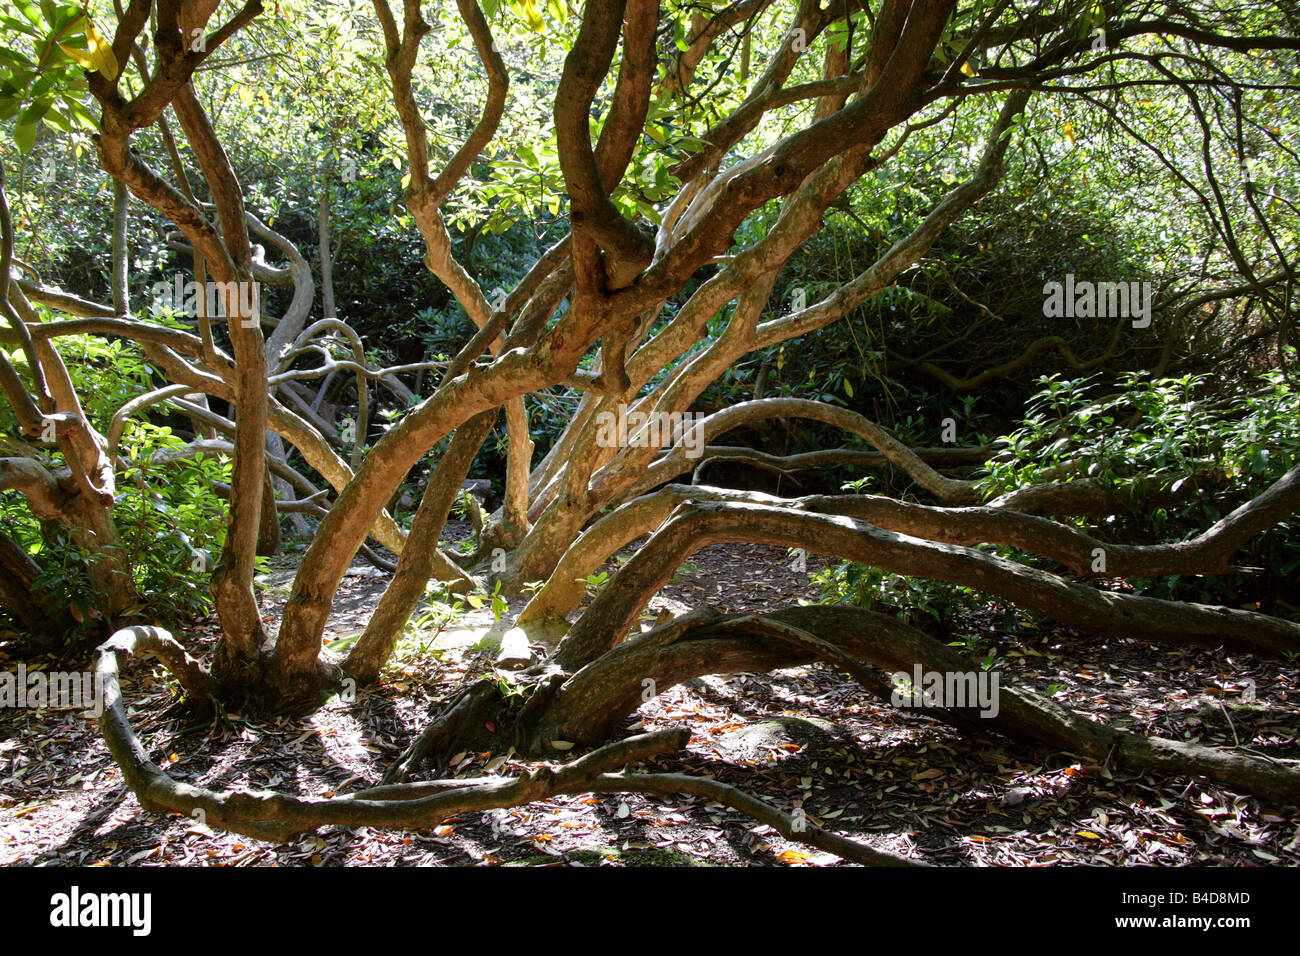 Rhododendron Branches Stock Photo